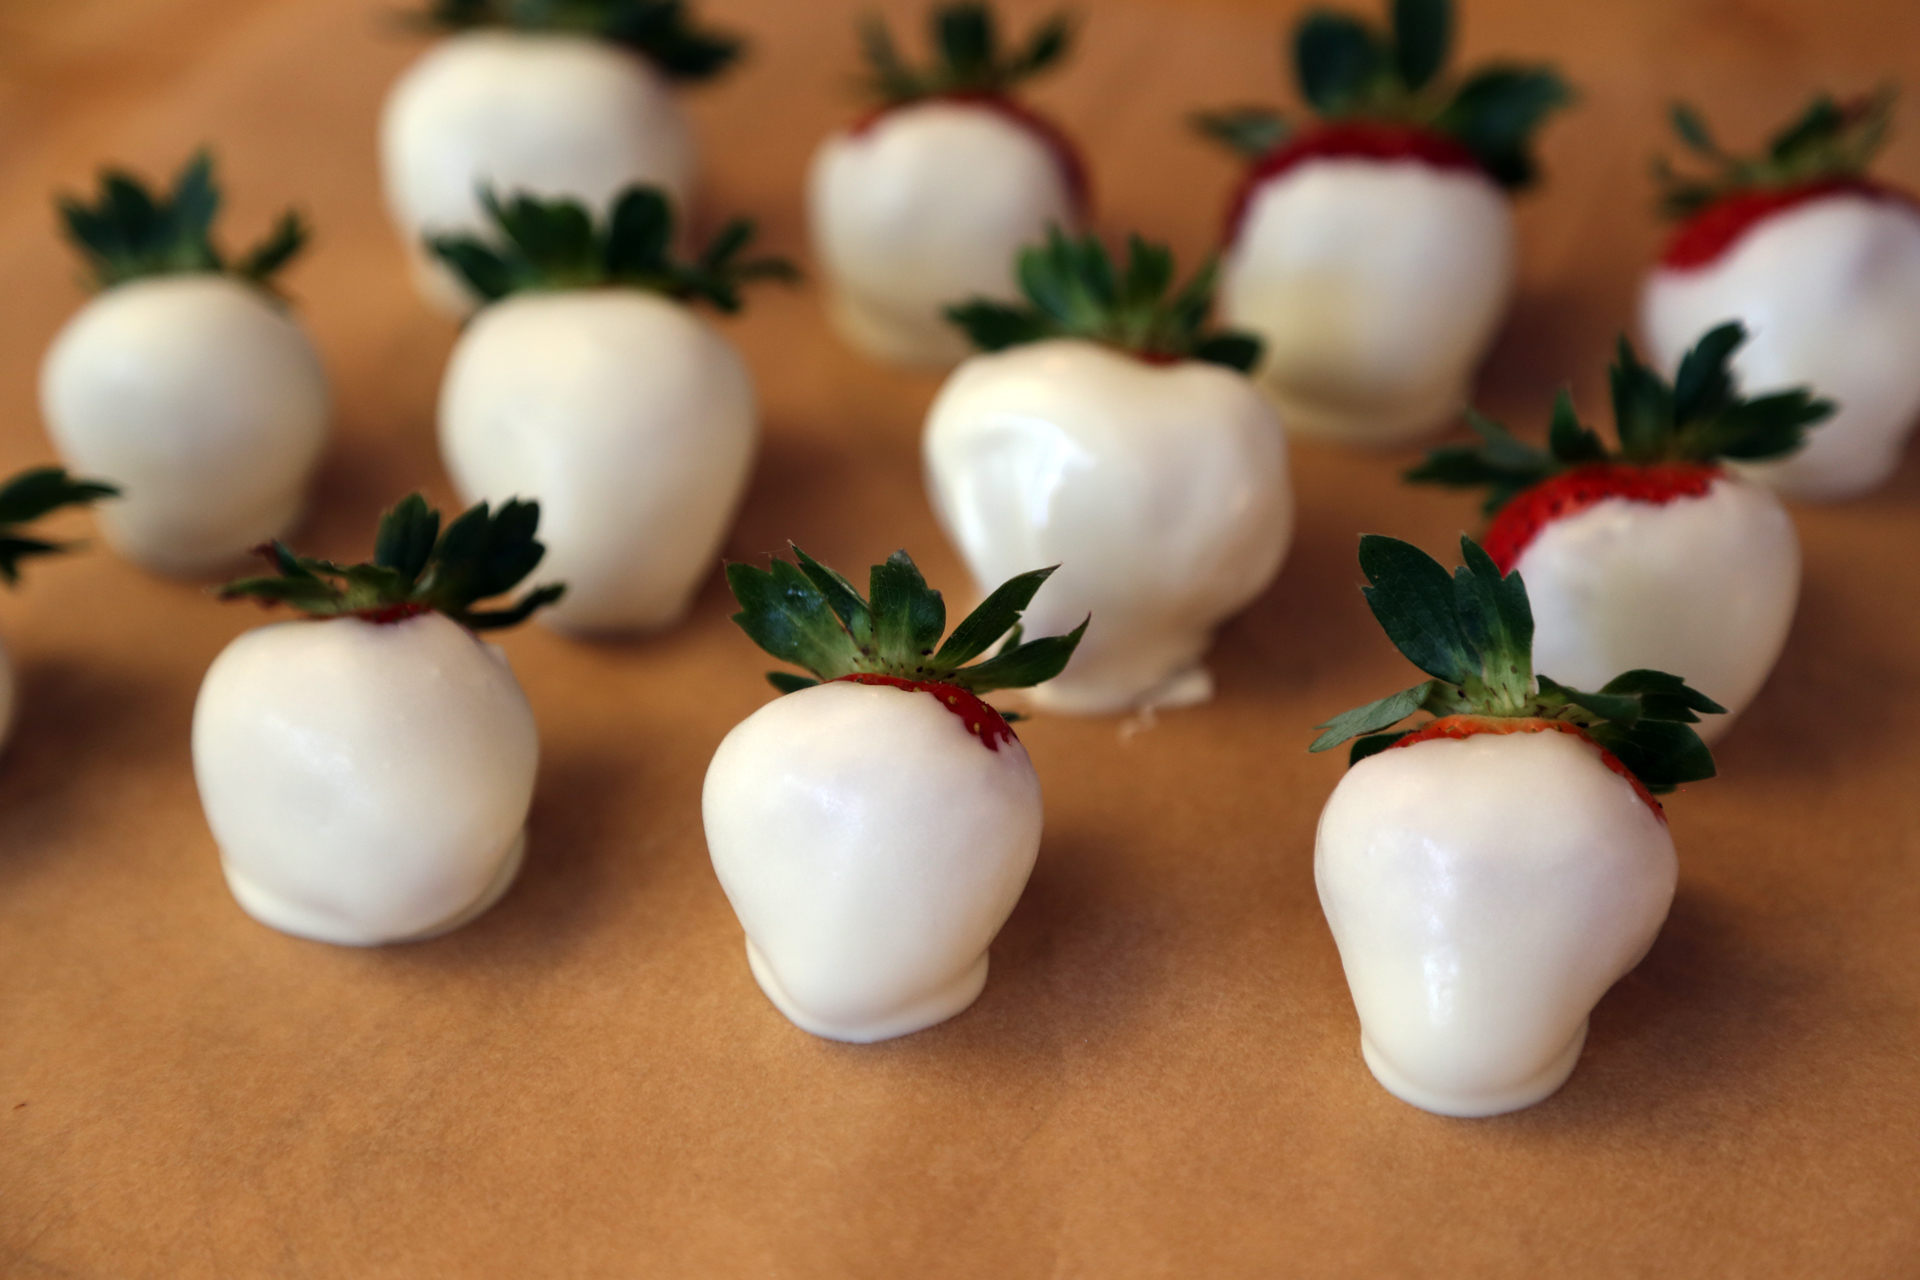 Place the faceless strawberry ghosts onto the prepared sheet pan to set, about 30 minutes.